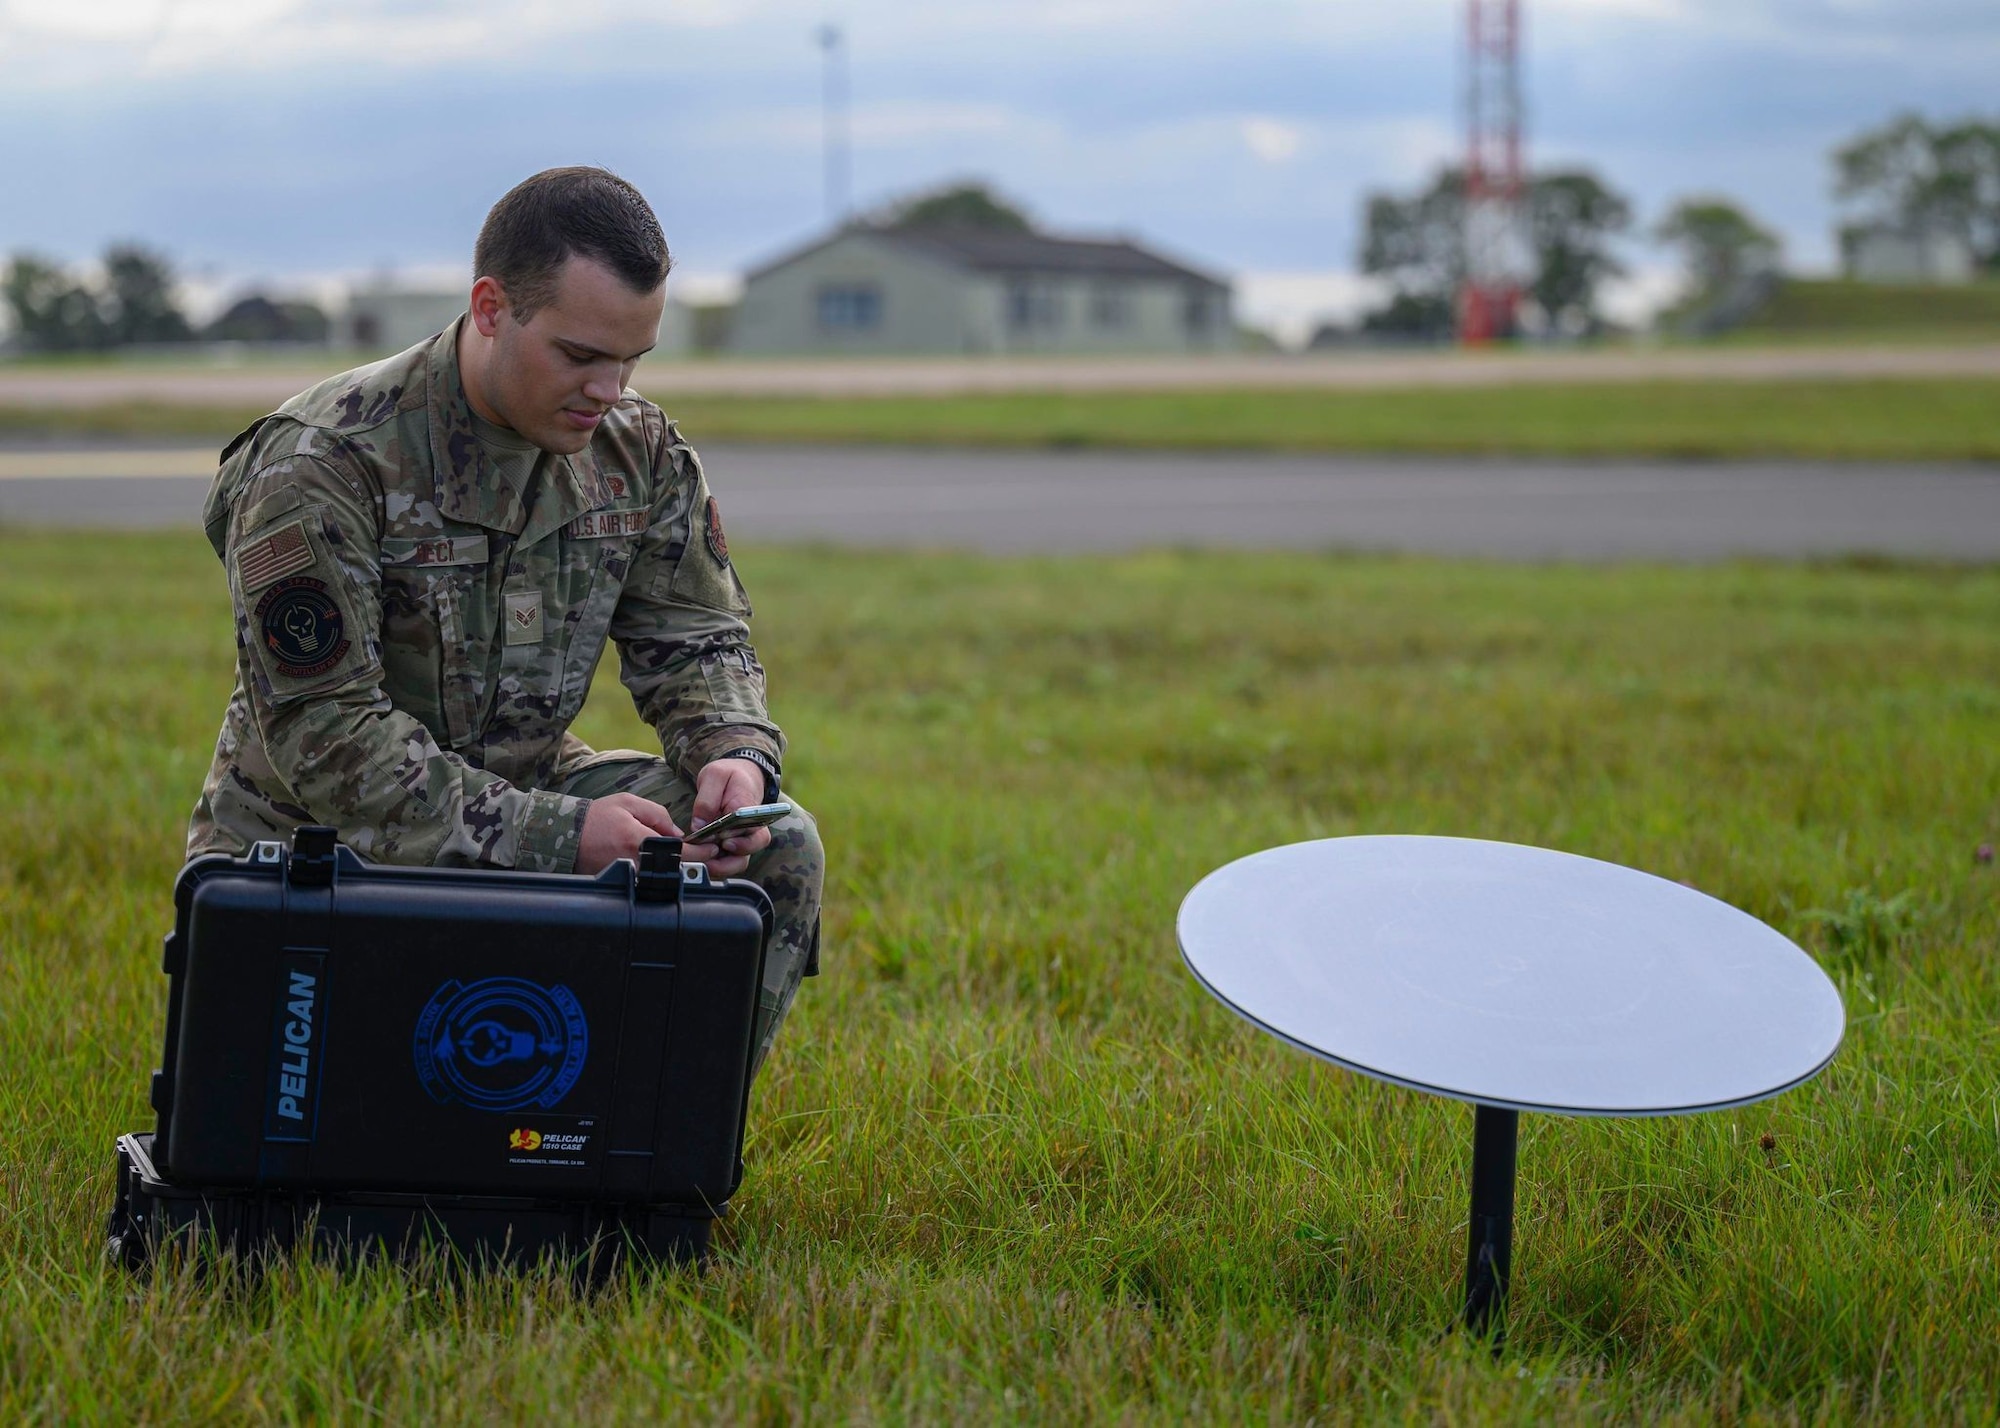 Senior Airman Jordan Heck, 7th Communications Squadron client systems apprentice, establishes GO-Comm connectivity with SpaceX’s Starlink service on Royal Air Force Fairford, United Kingdom, in October 2021. SrA Heck developed the portable communications kit, leveraging only $3,000 of squadron innovation funds to build two kits. (U.S. Air Force photo by Airman 1st Class Josiah Brown)